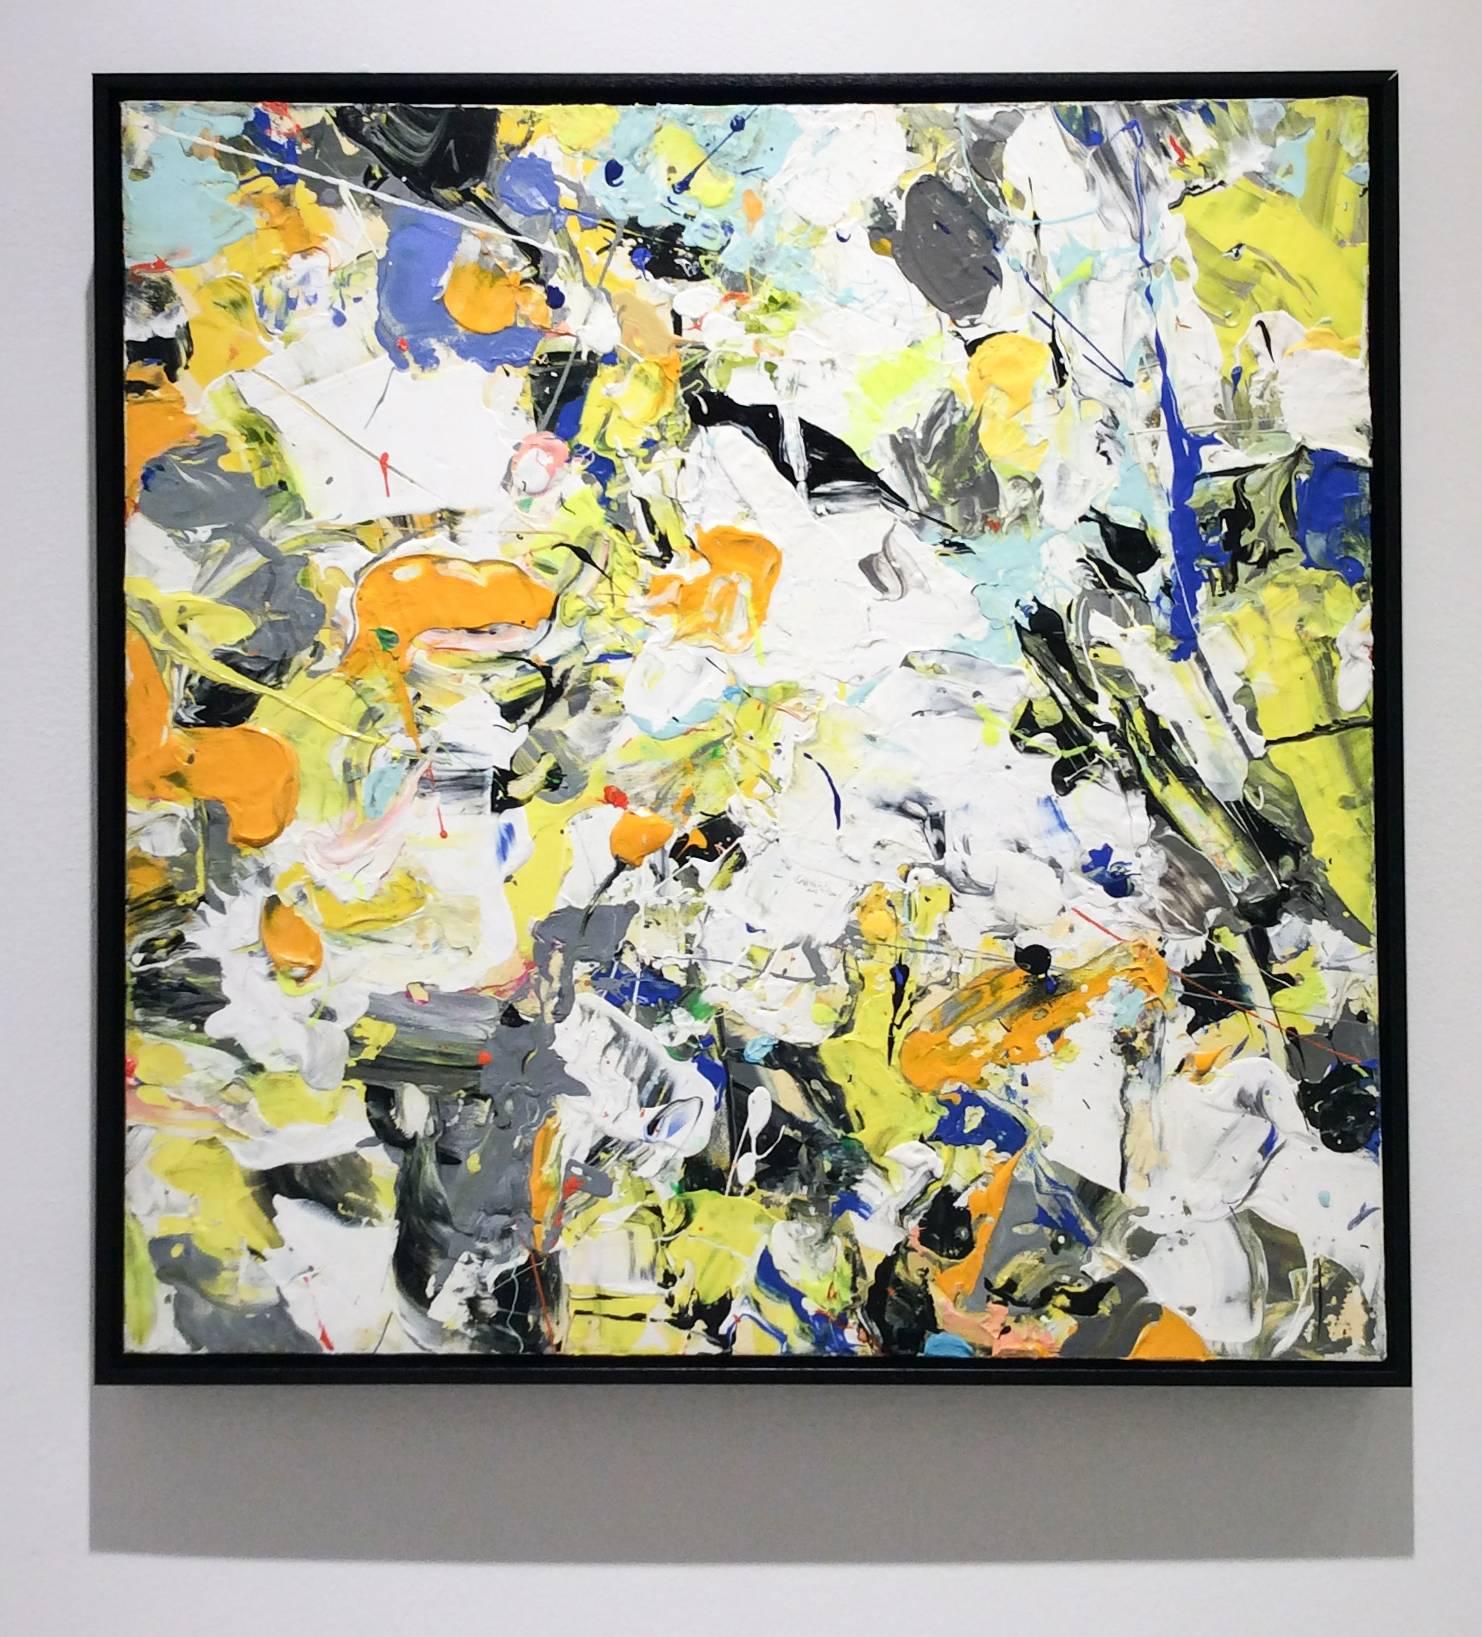 Contemporary abstract expressionist painting in yellow, tangerine orange, blue, and dior grey 
24 x 24 inches on stretched canvas, signed and dated on reverse

This modern abstract expressionist style painting was painted by artist, Adam Cohen in